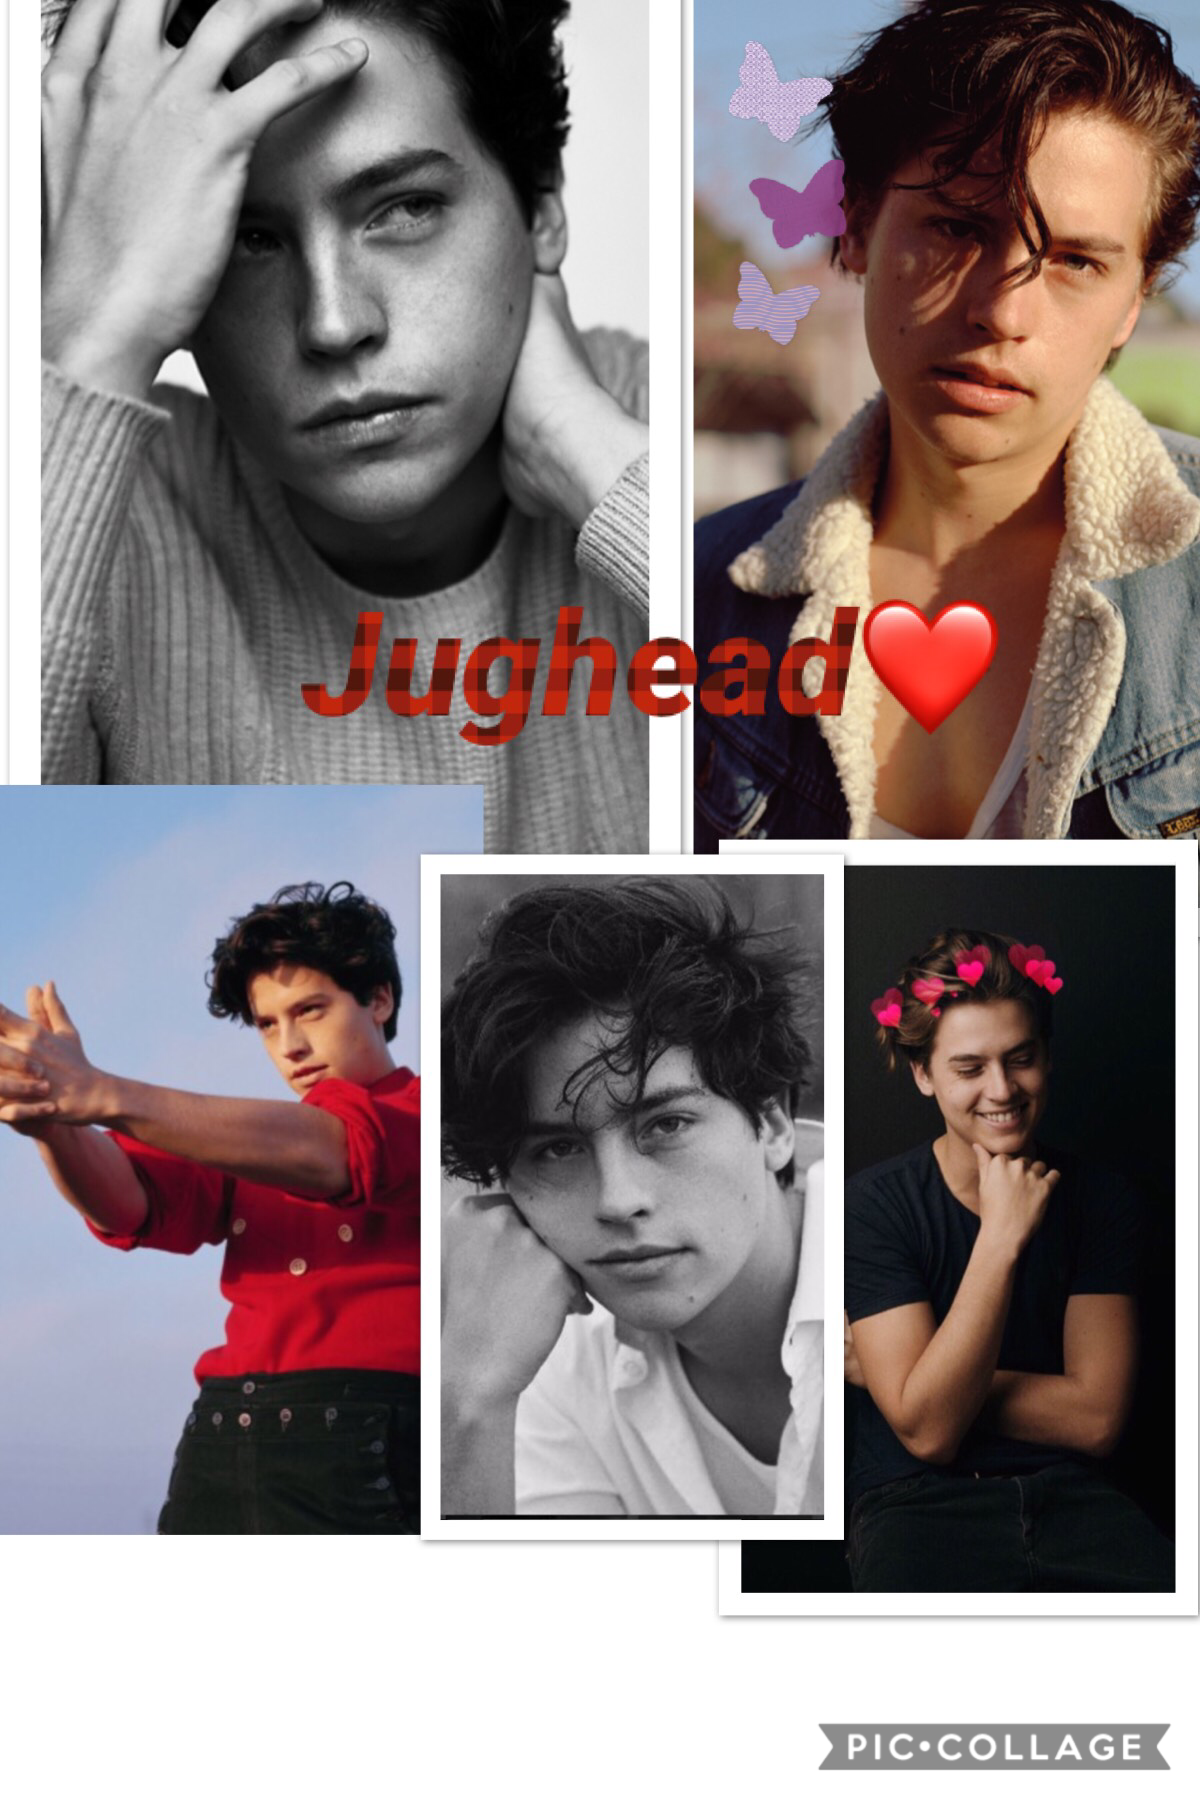 Cole sprouse❤️